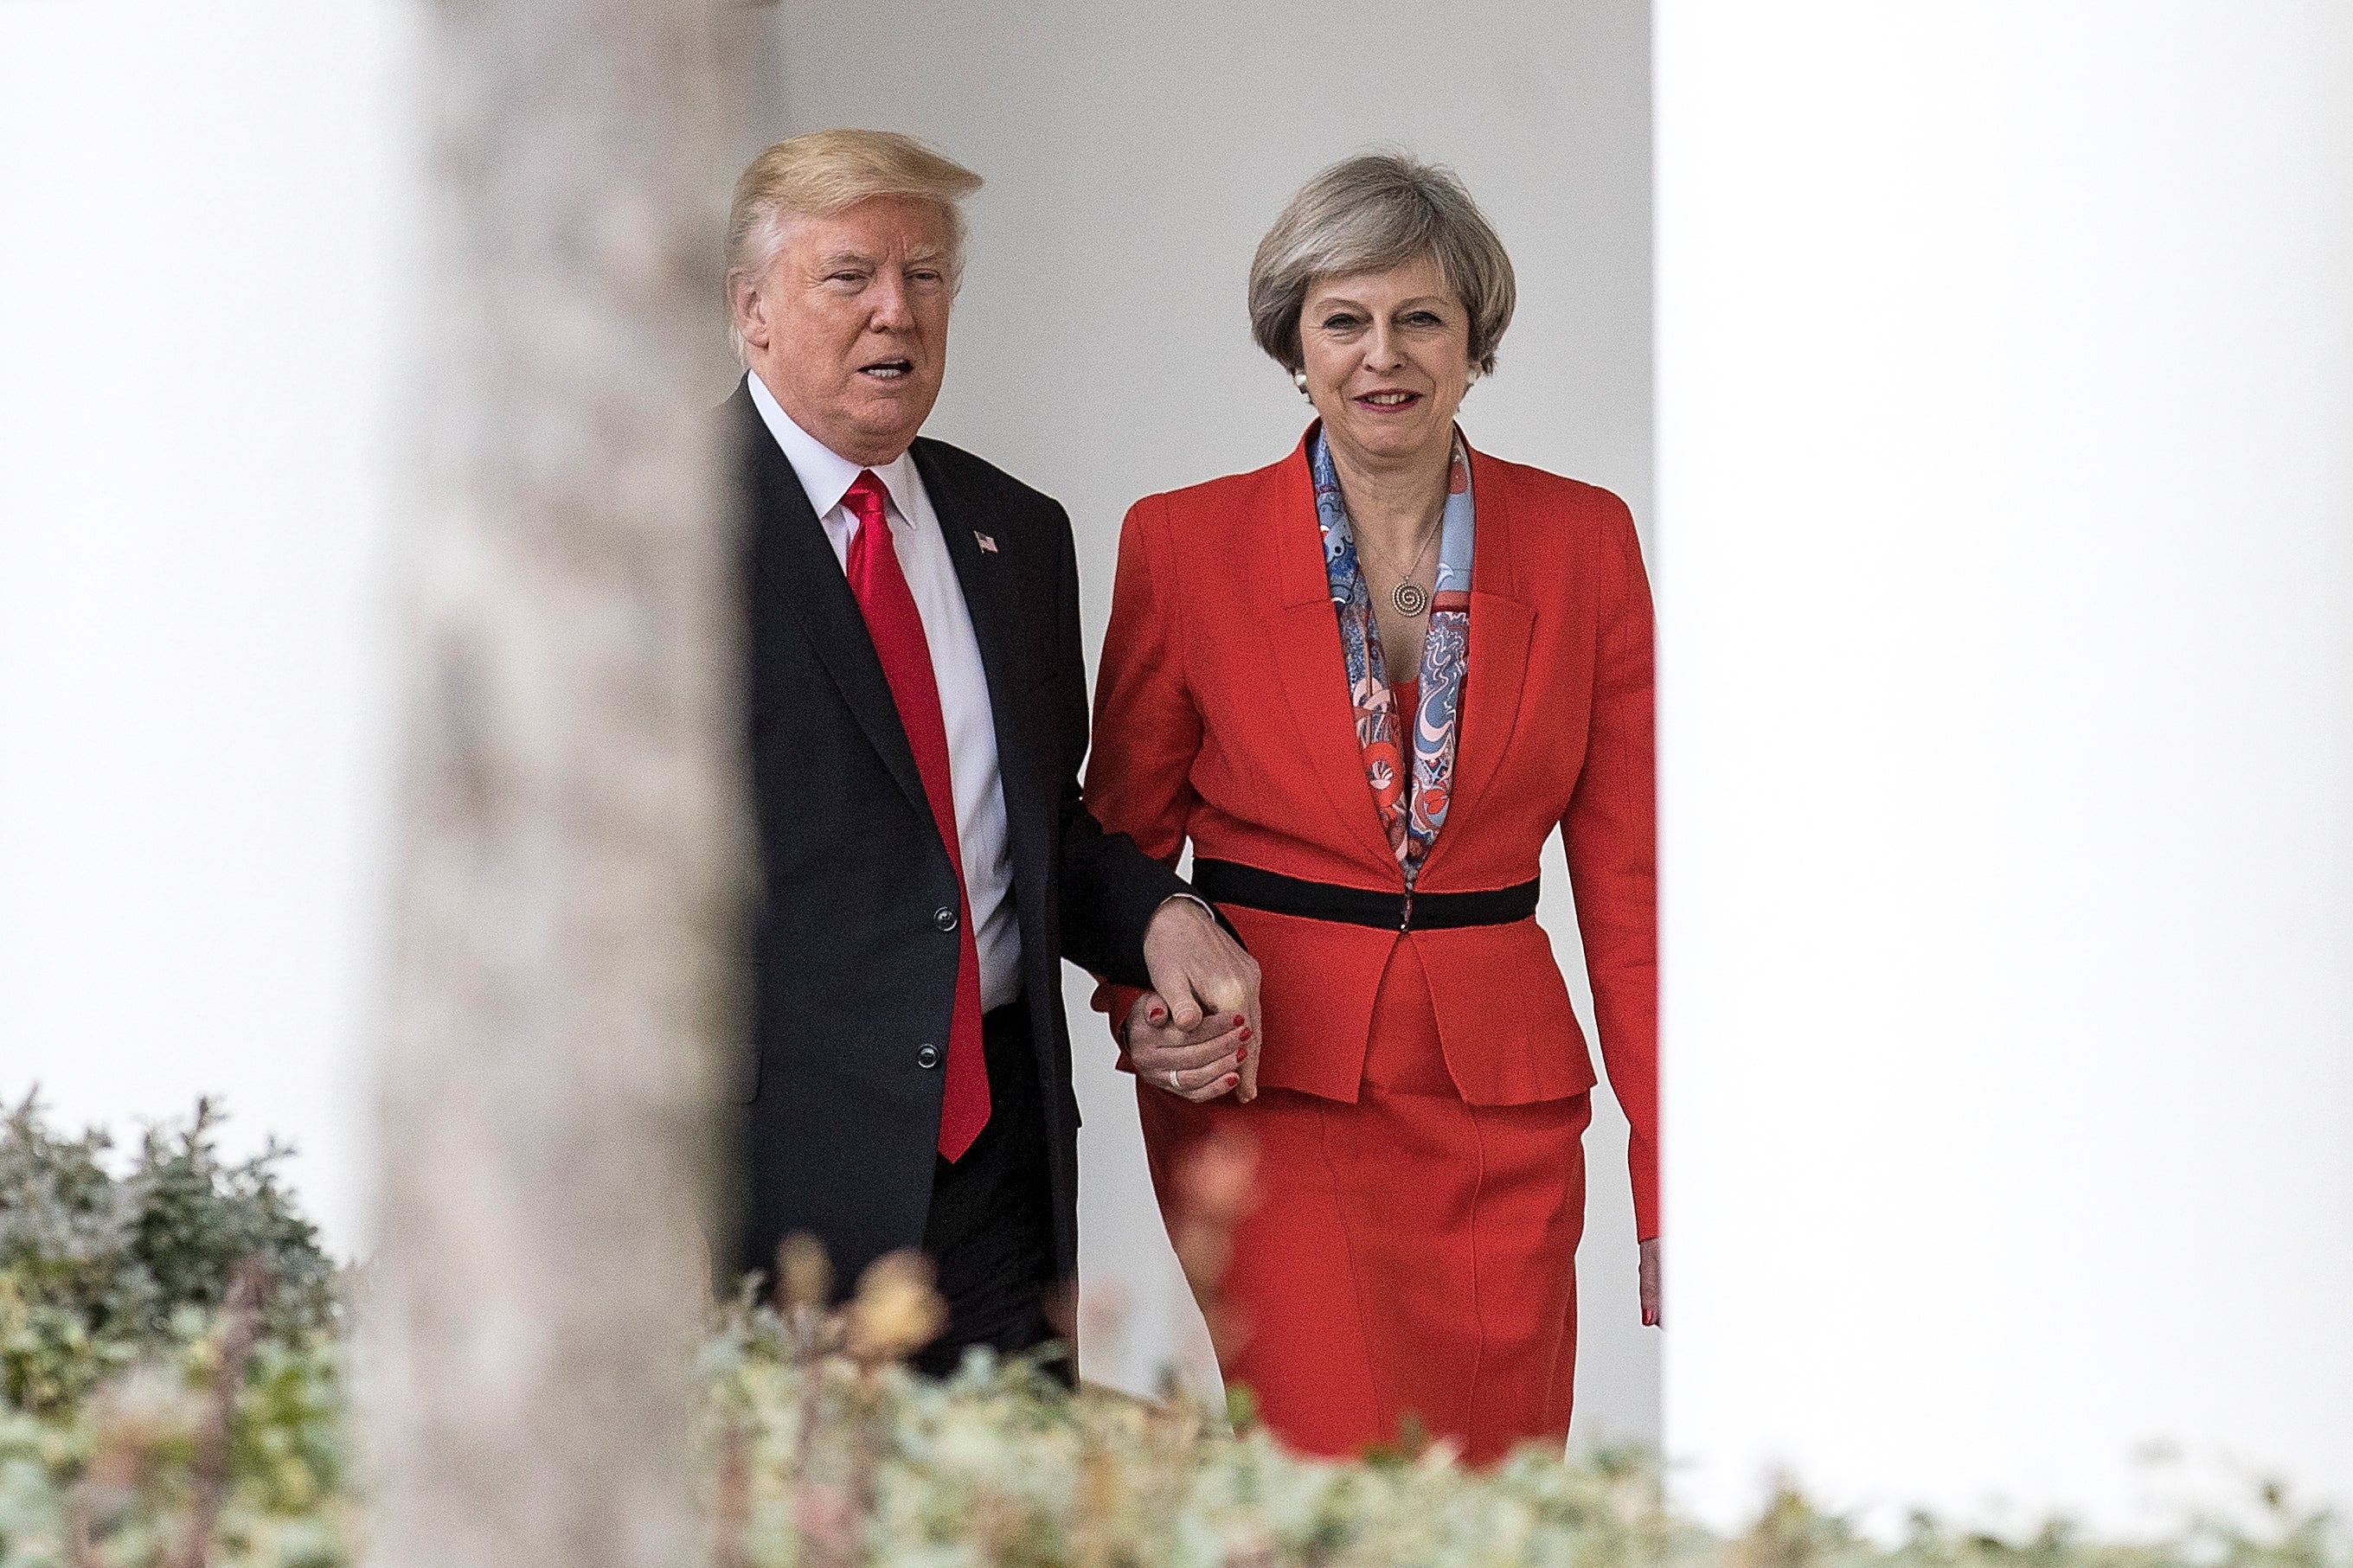 When Donald Trump became US president, his first meeting with a major foreign leader at the White House was with the UK prime minister, Theresa May